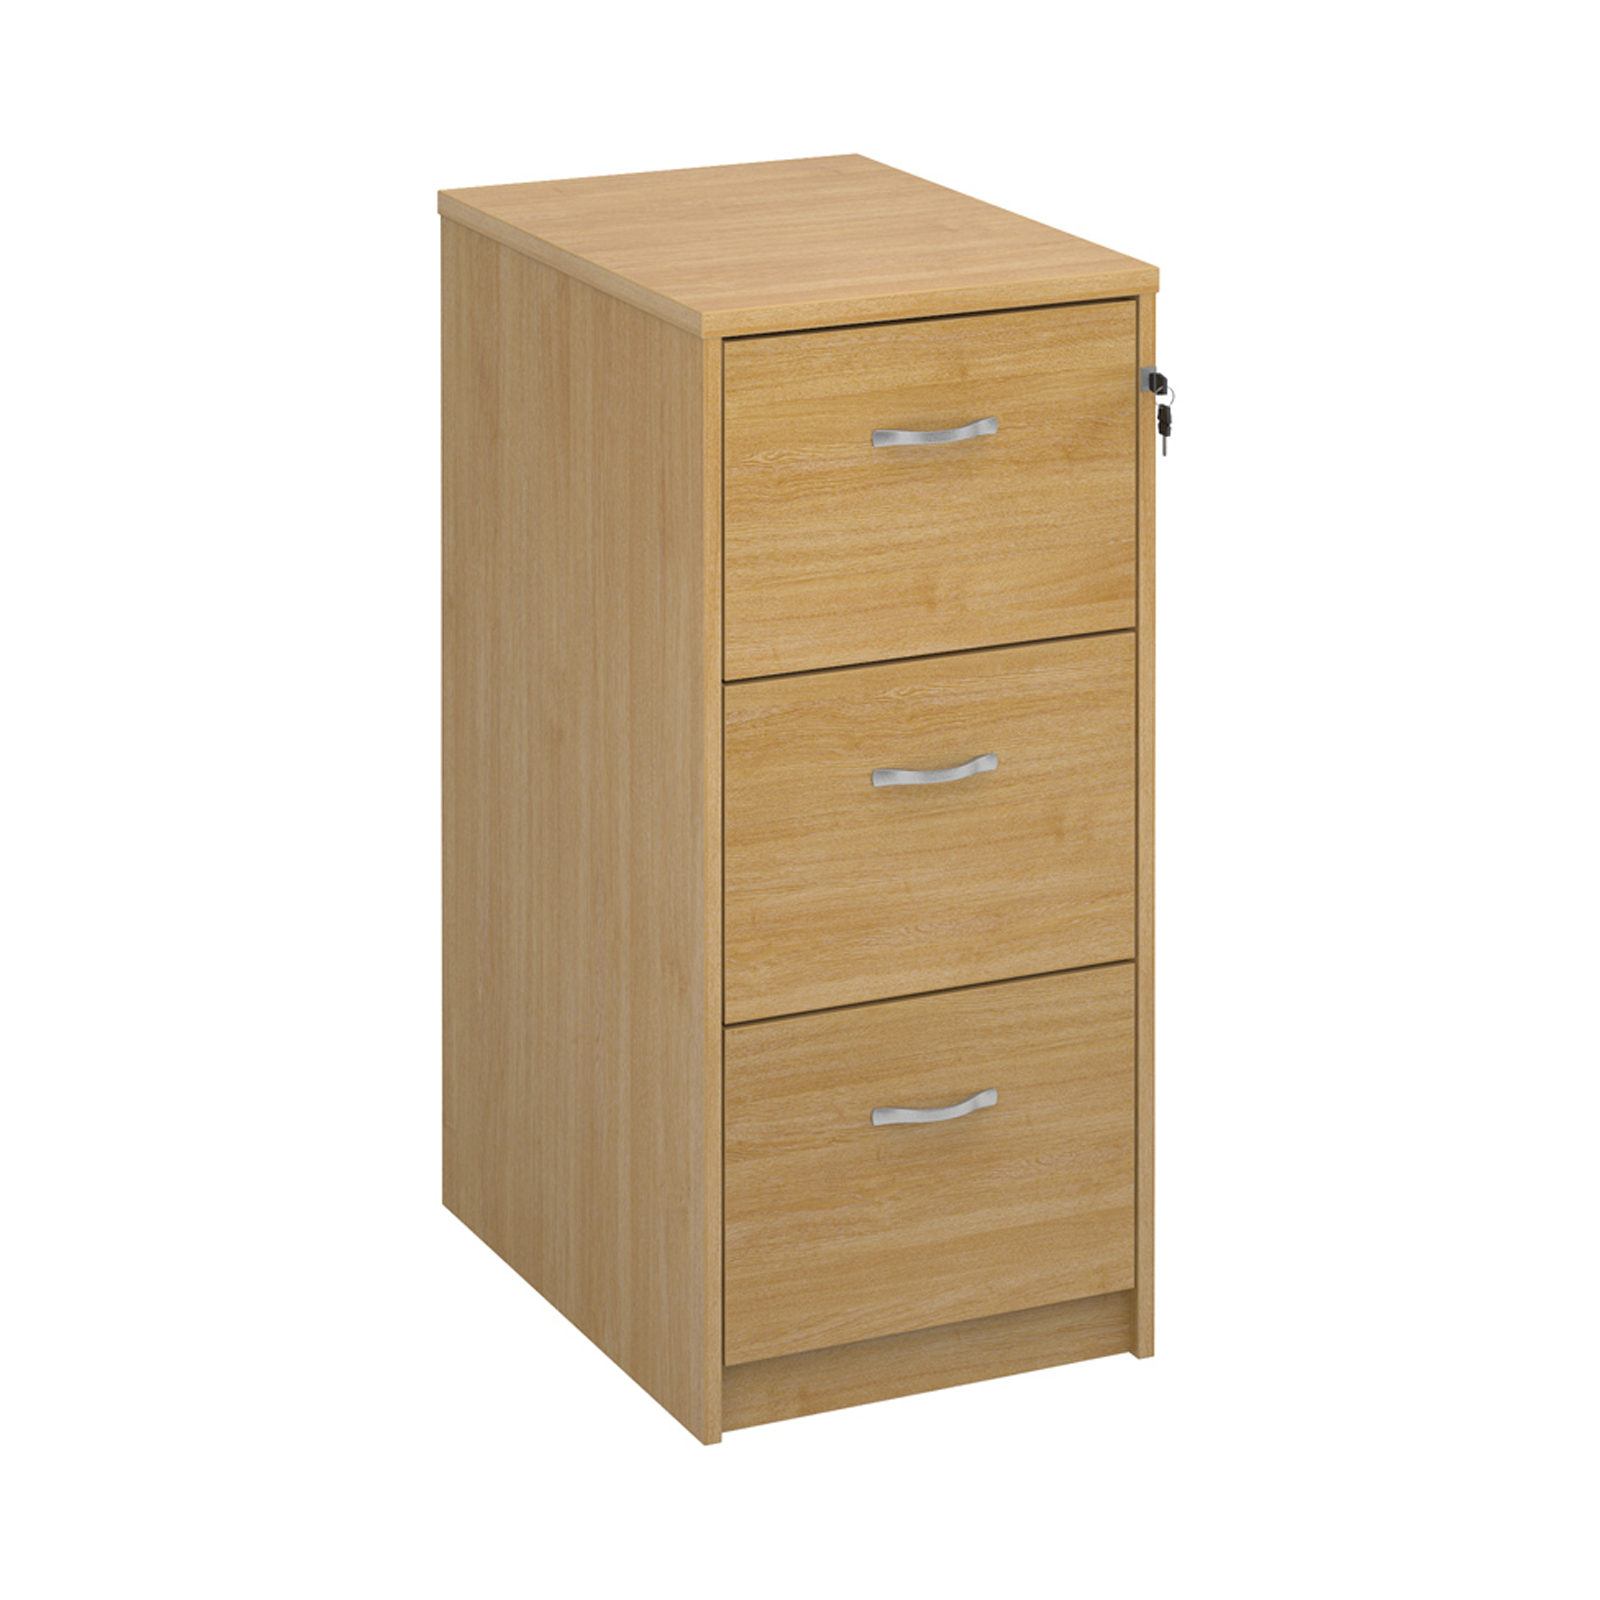 Wood Wooden 3 drawer filing cabinet with silver handles 1045mm high - oak